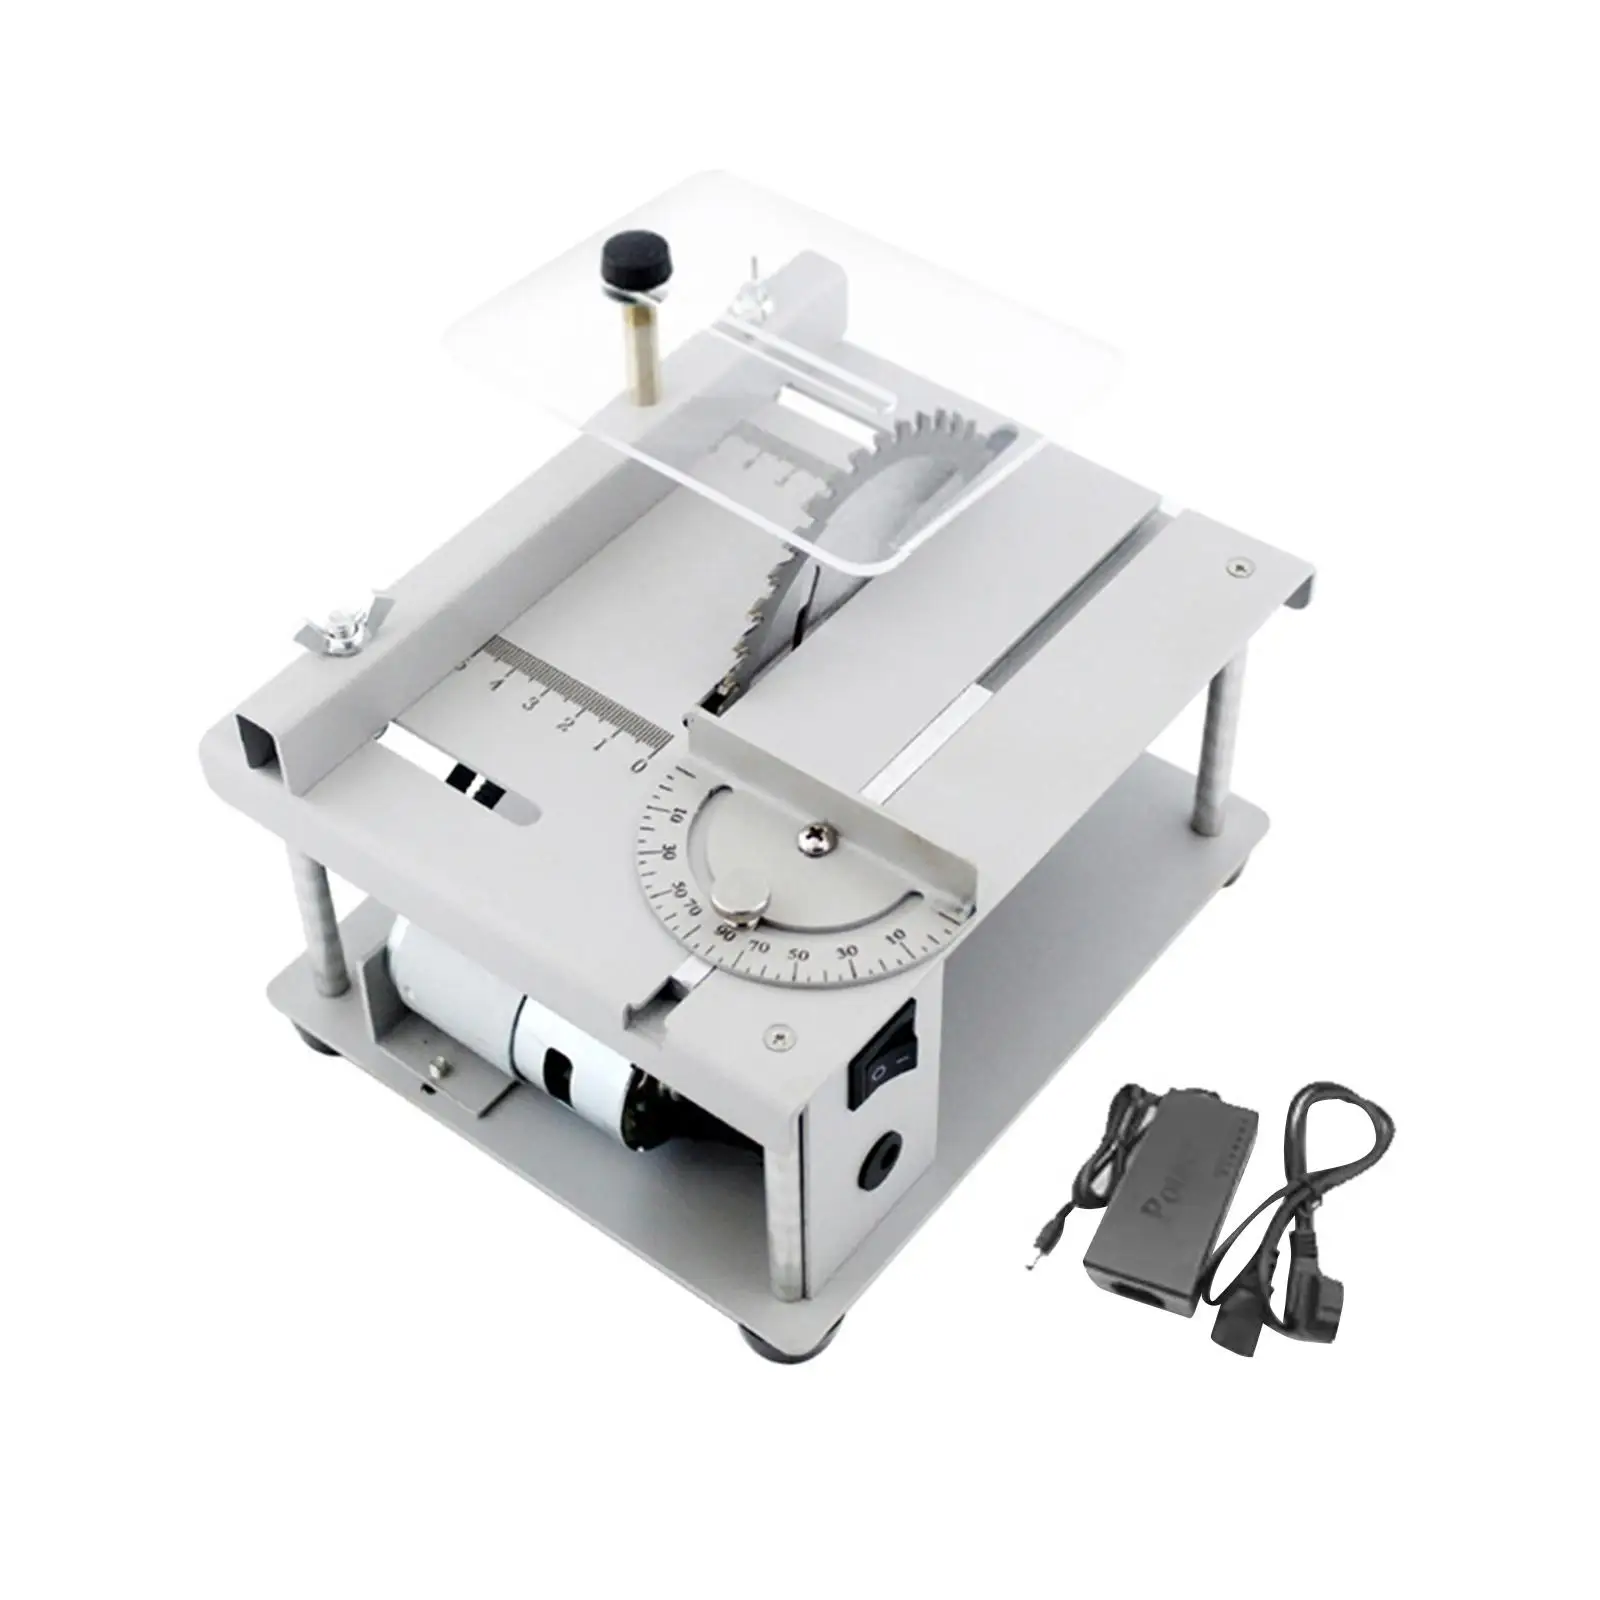 Mini Table Saw Grinding Tool Portable DIY Wood Acrylic Handmade Woodworking Bench Saw for Miniatures Aluminum Wood Metal Crafts